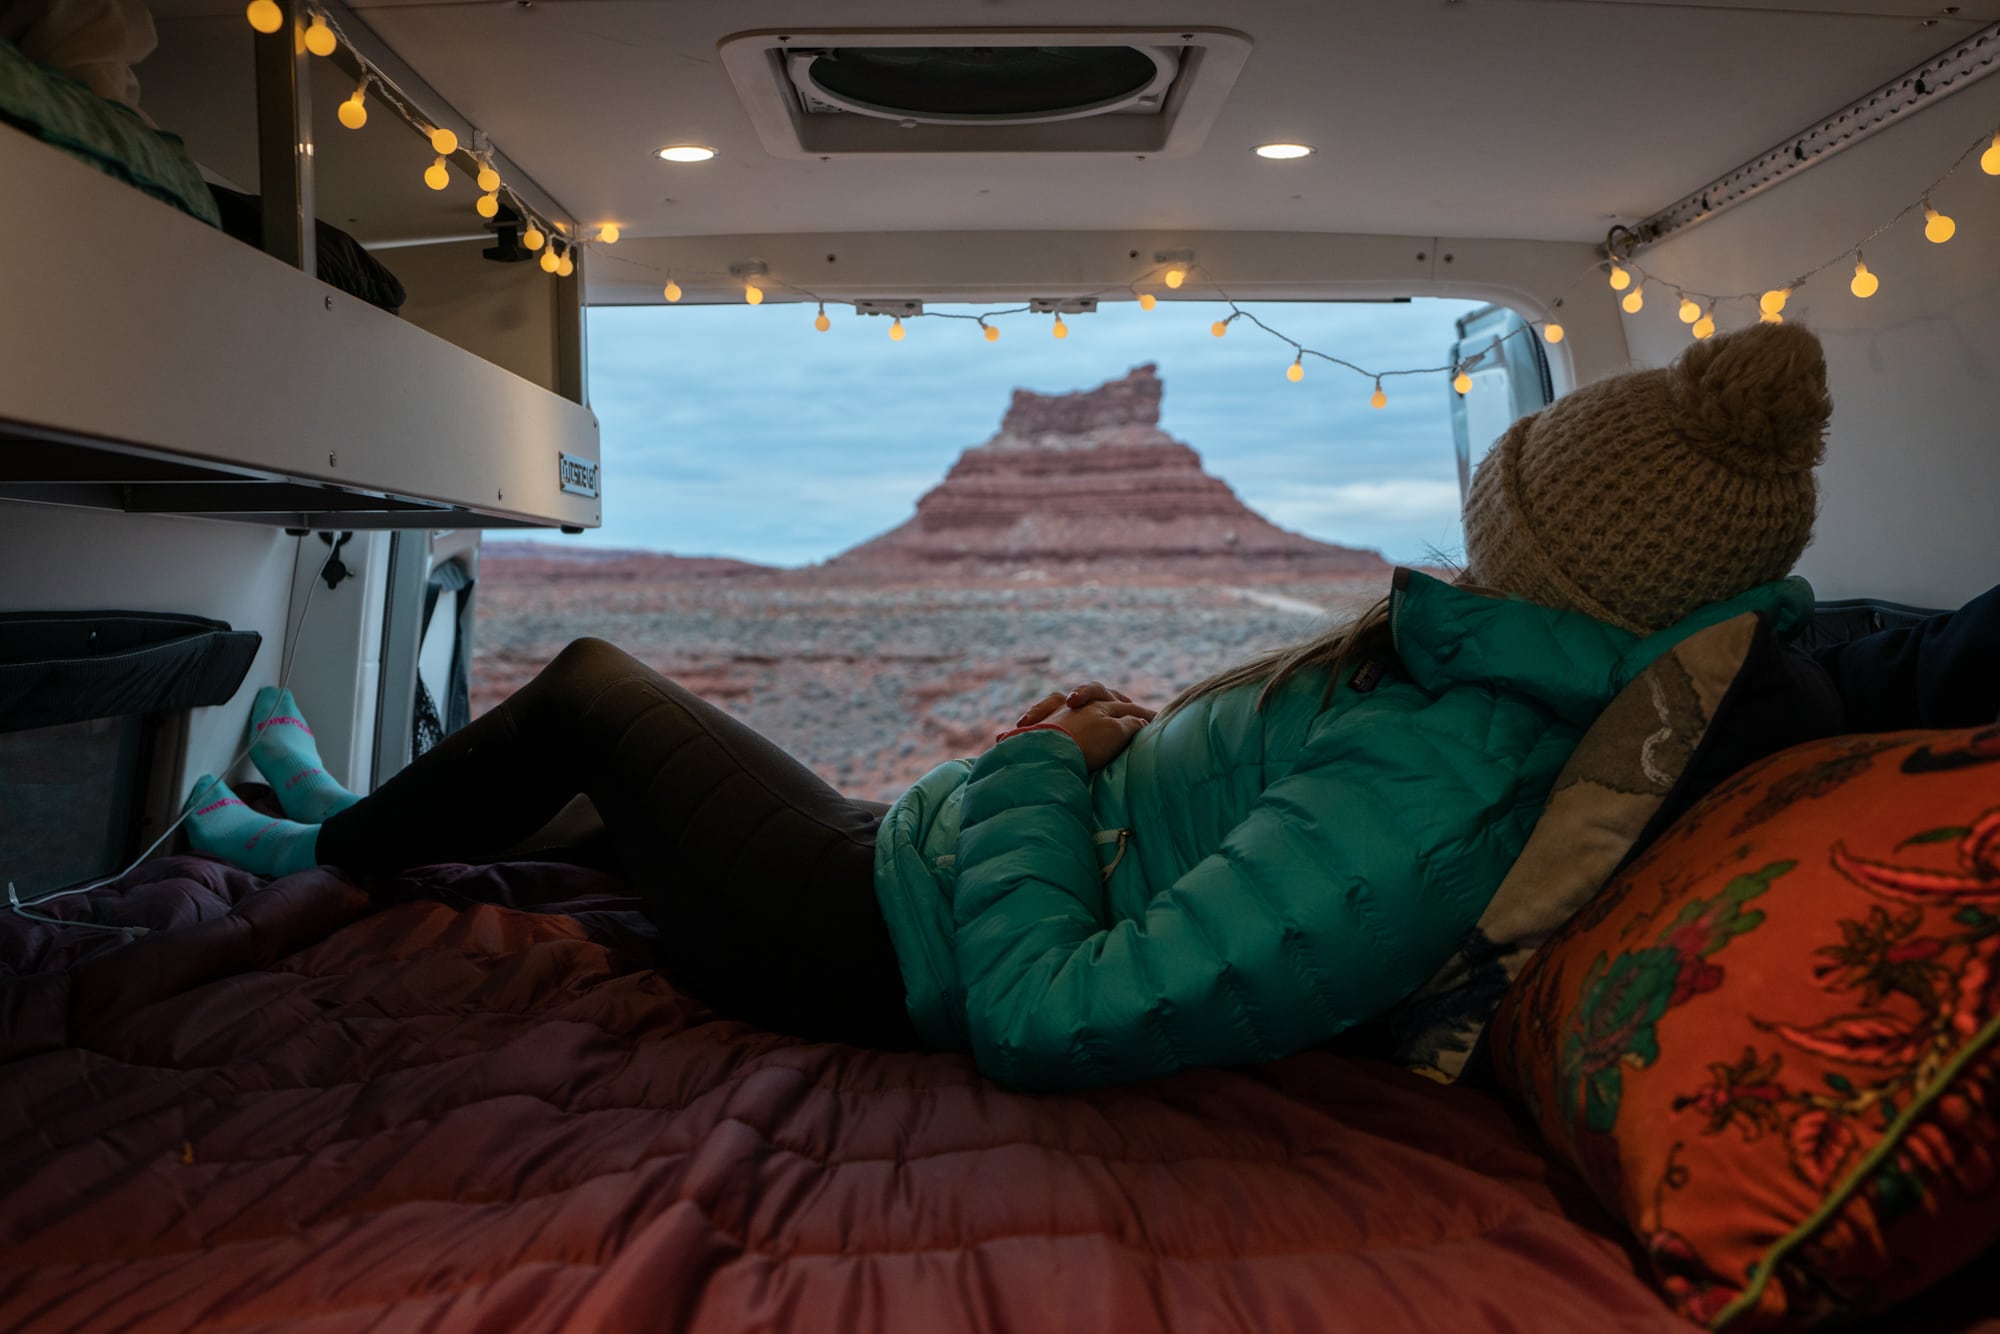 Packing for van life? Learn what clothes you need with this van life clothing checklist.